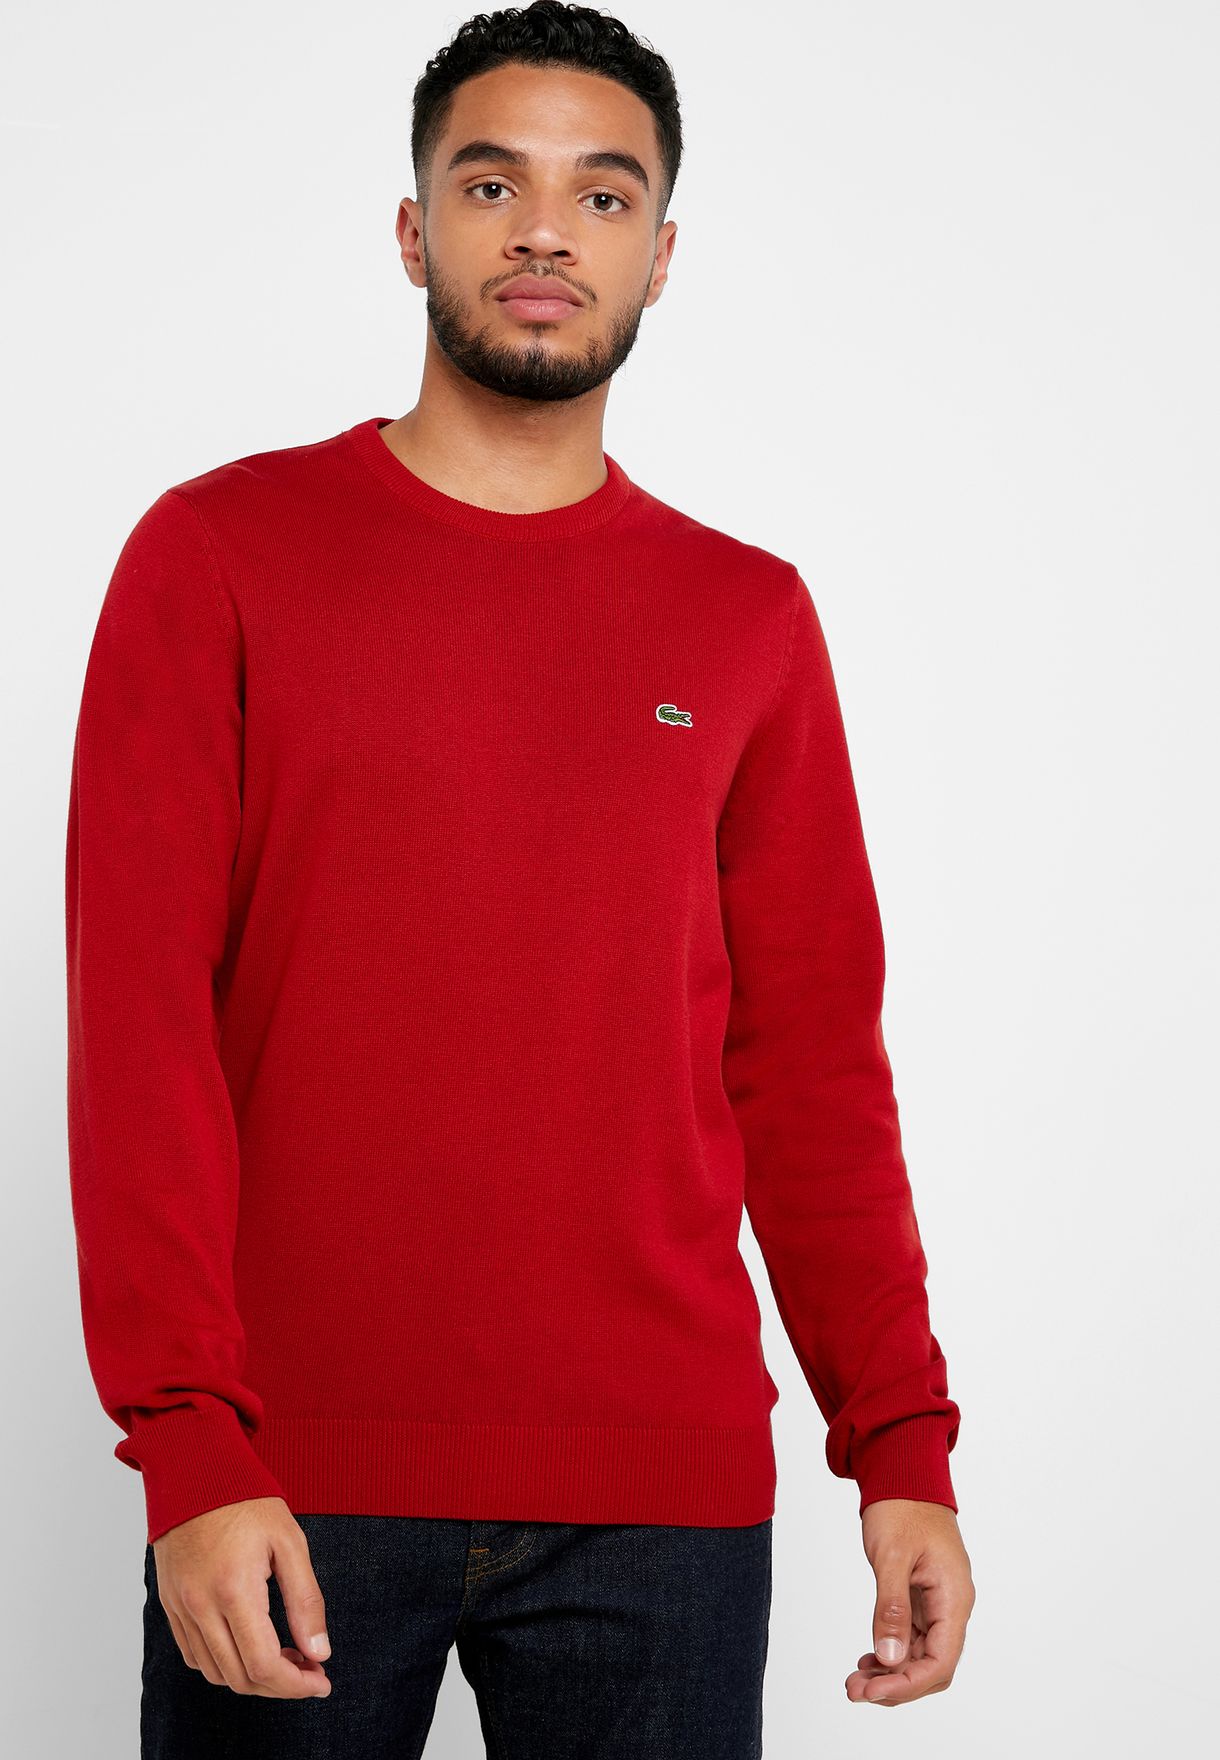 lacoste sweater red